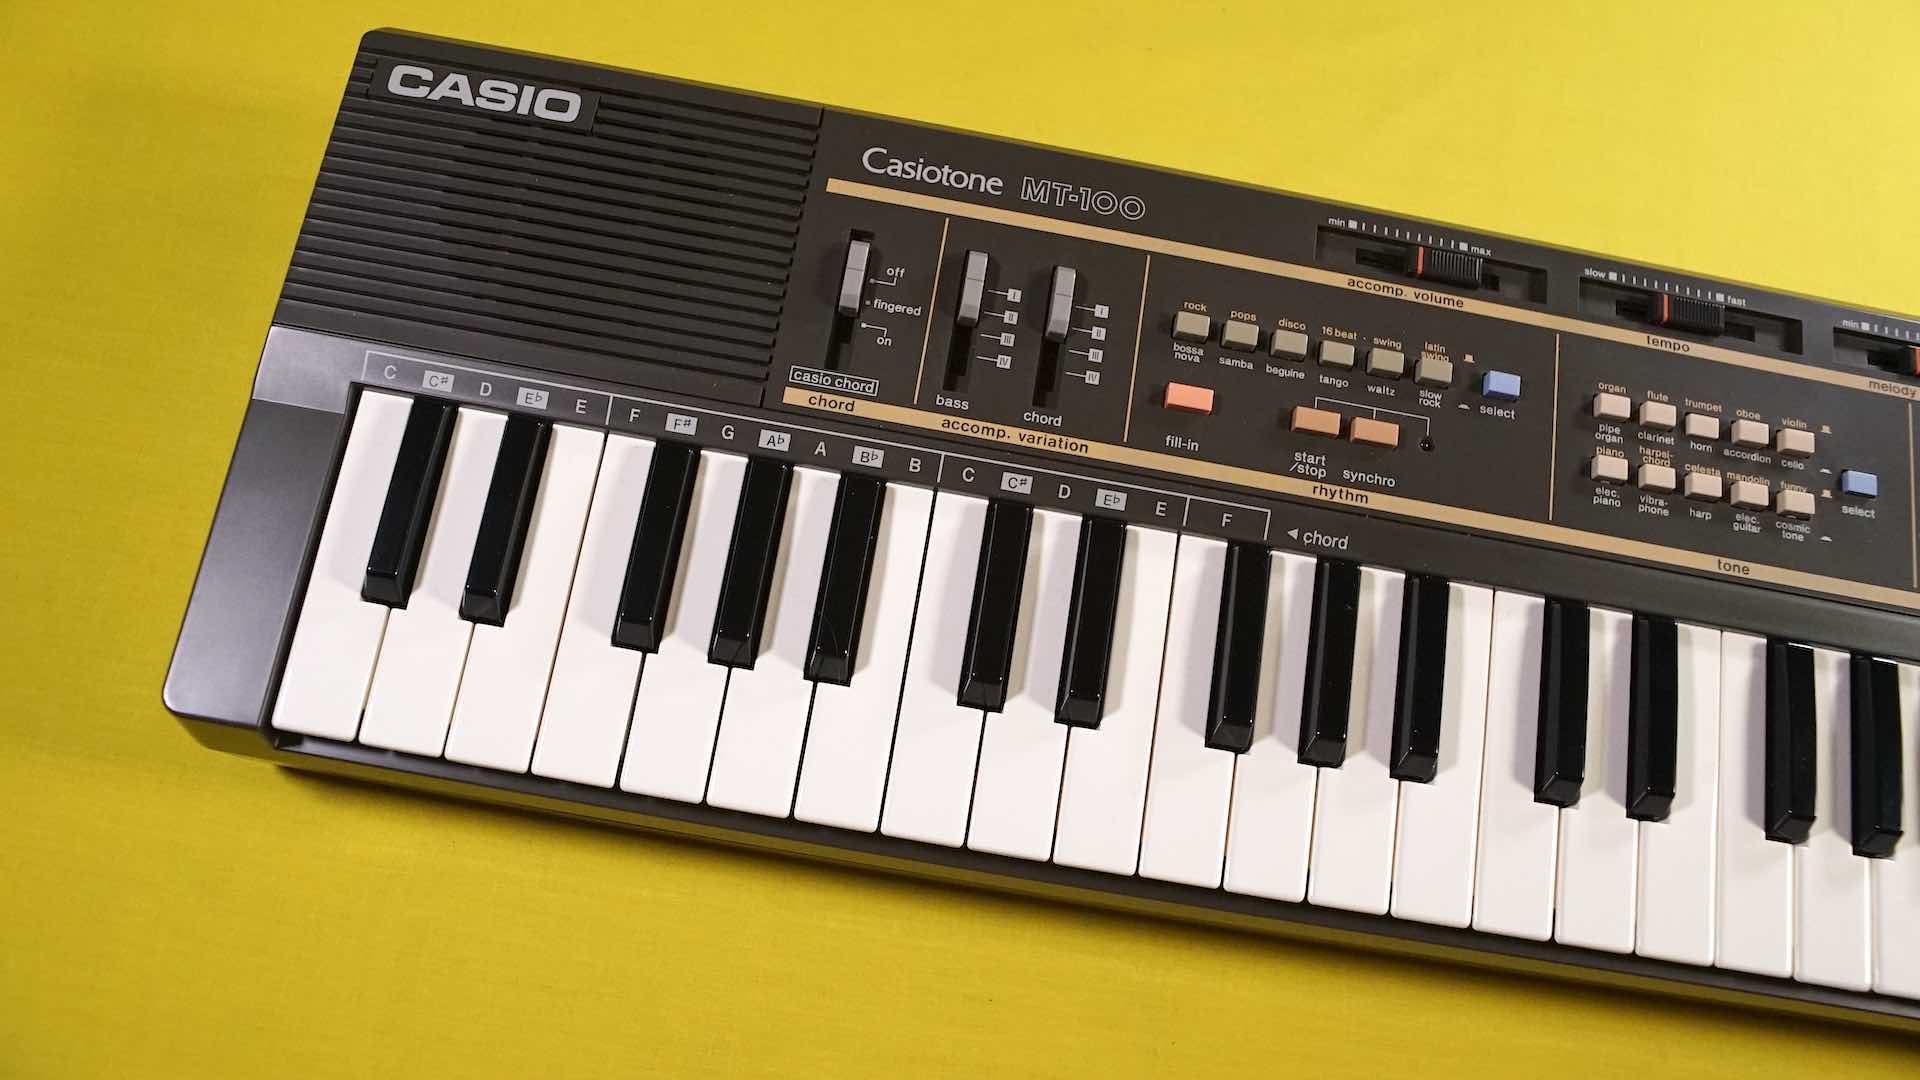 Casiotone MT-100 keyboard on a yellow background